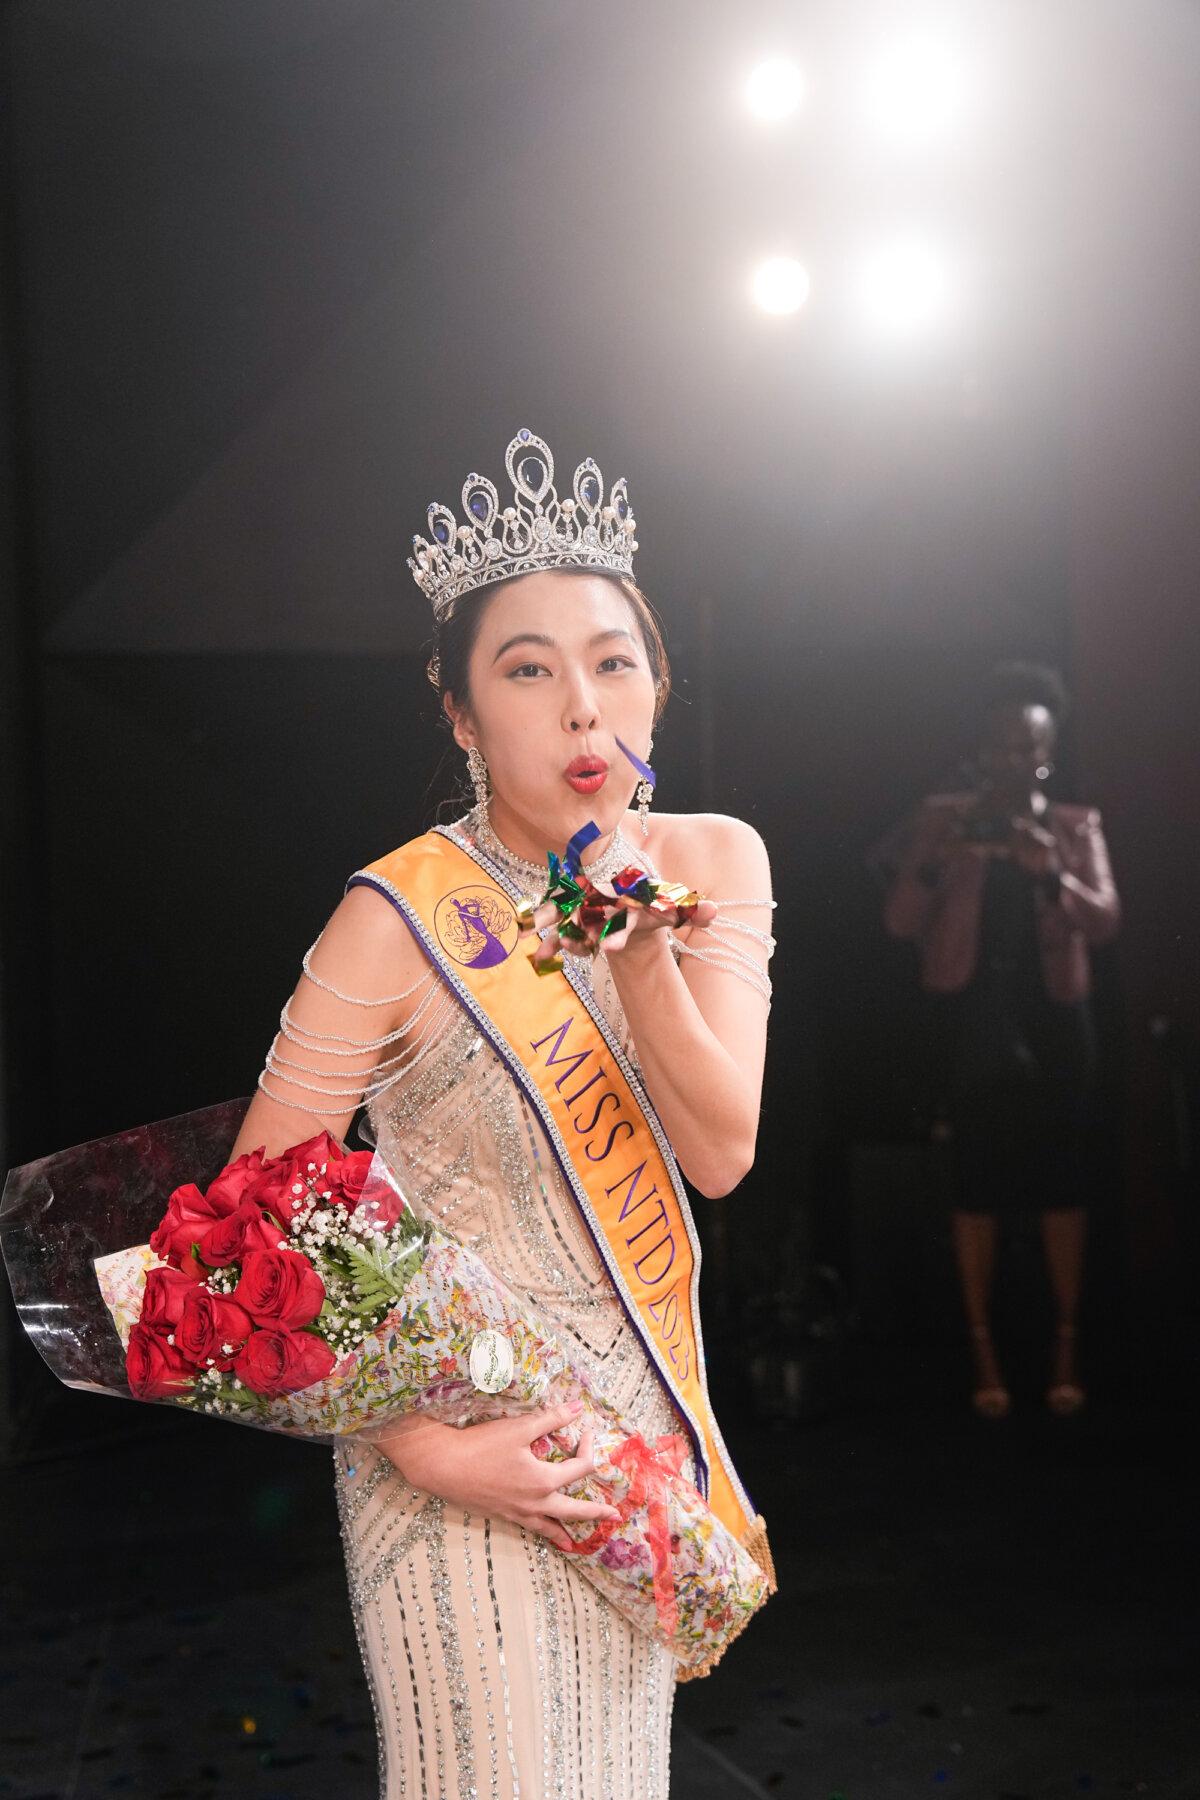  Cynthia Sun after she was crowned Miss NTD at NTD's inaugural Global Chinese Beauty Pageant in Purchase, N.Y., on Sept. 30, 2023. (Larry Dye/The Epoch Times)